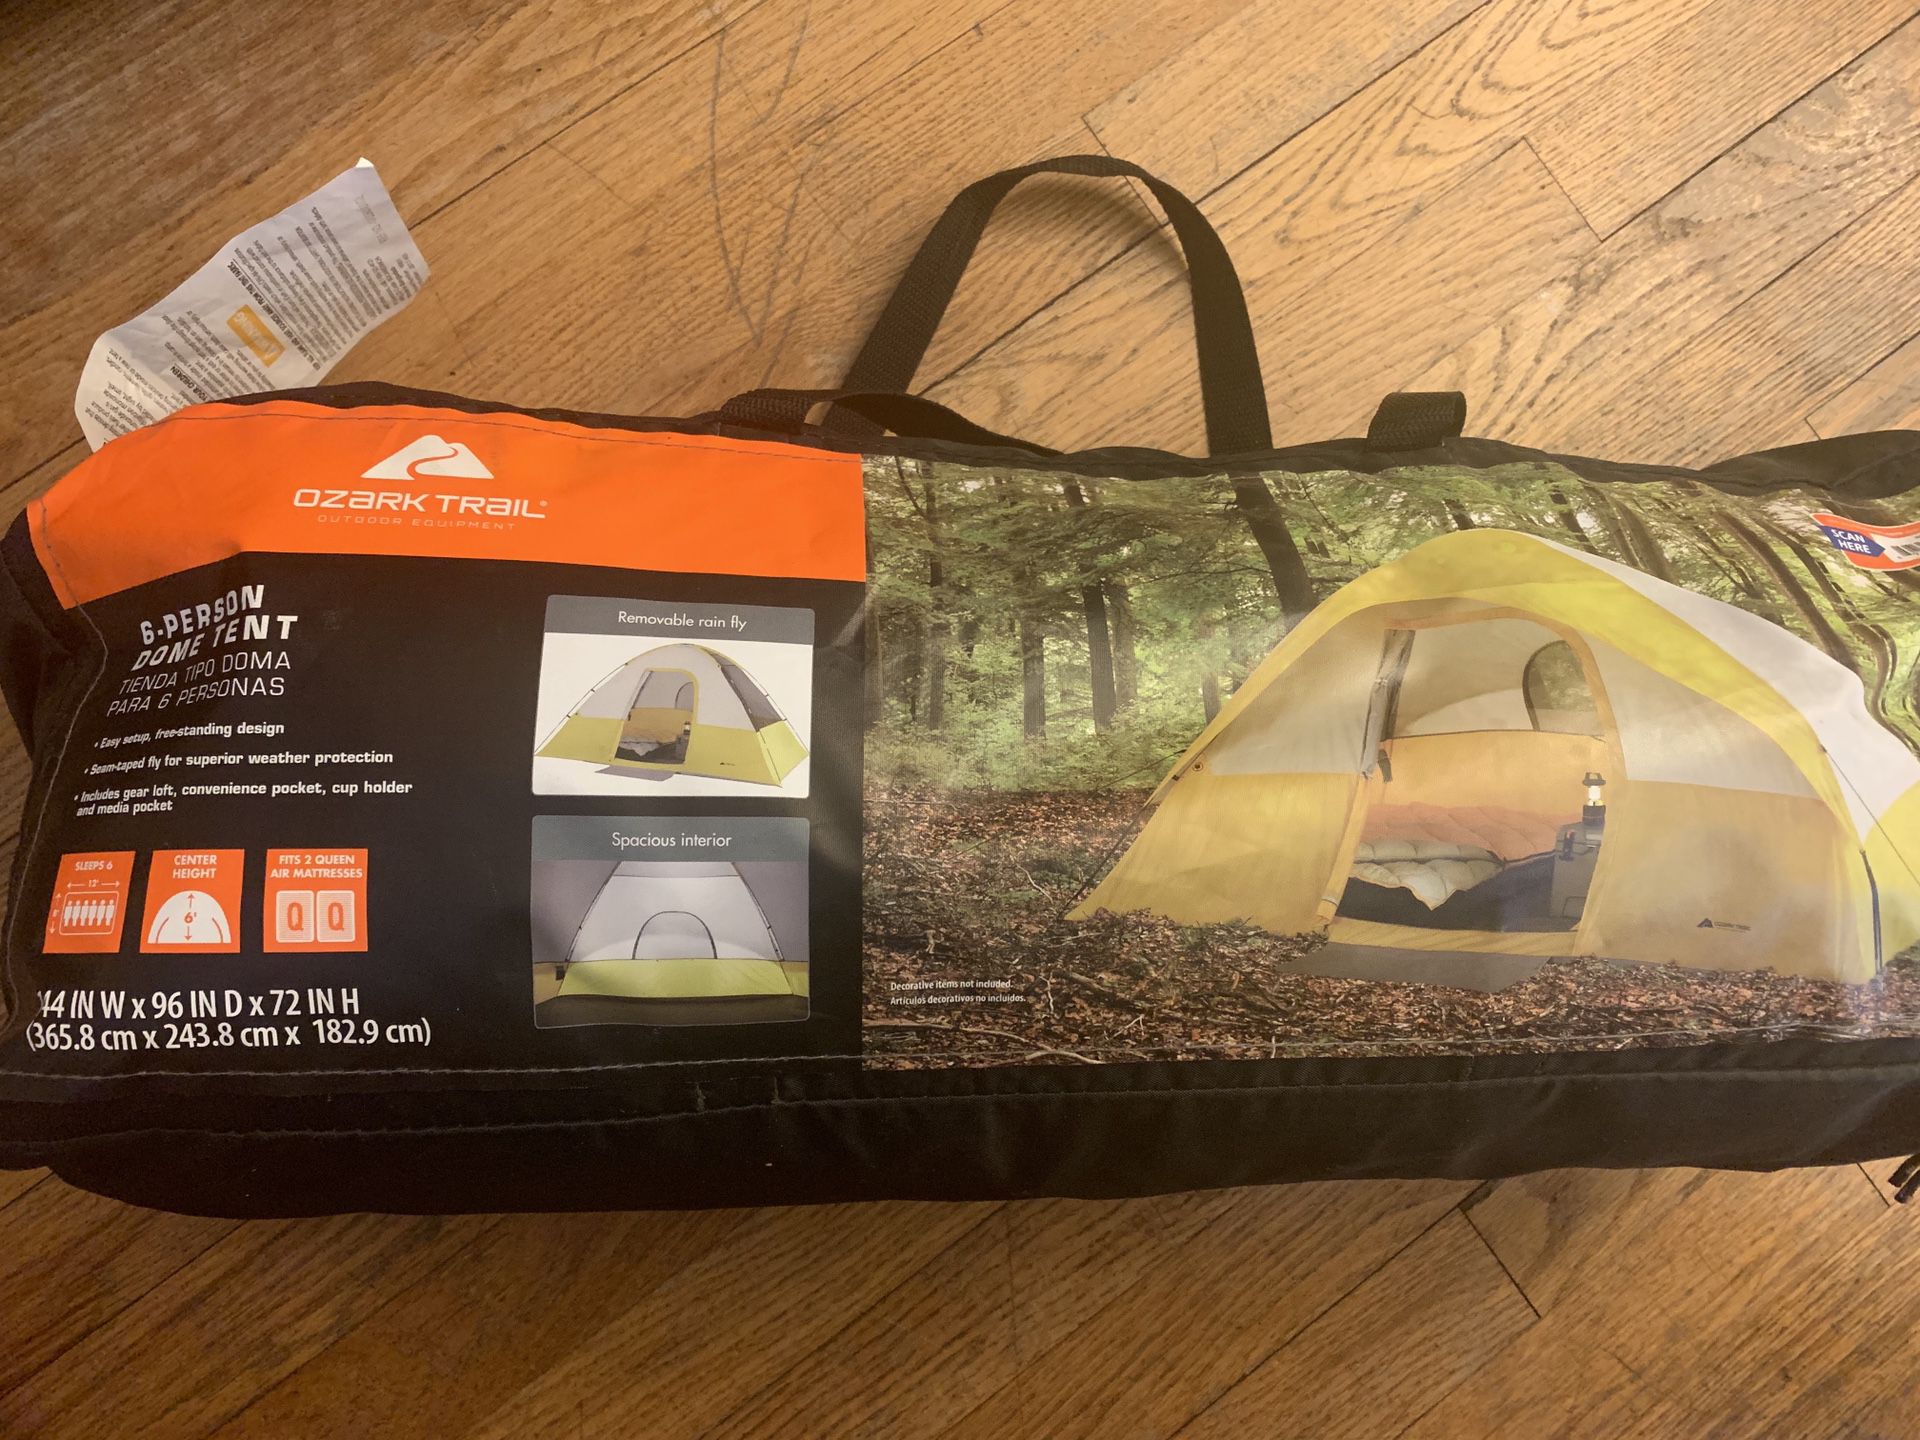 Camping Bundle! Used just once. $100